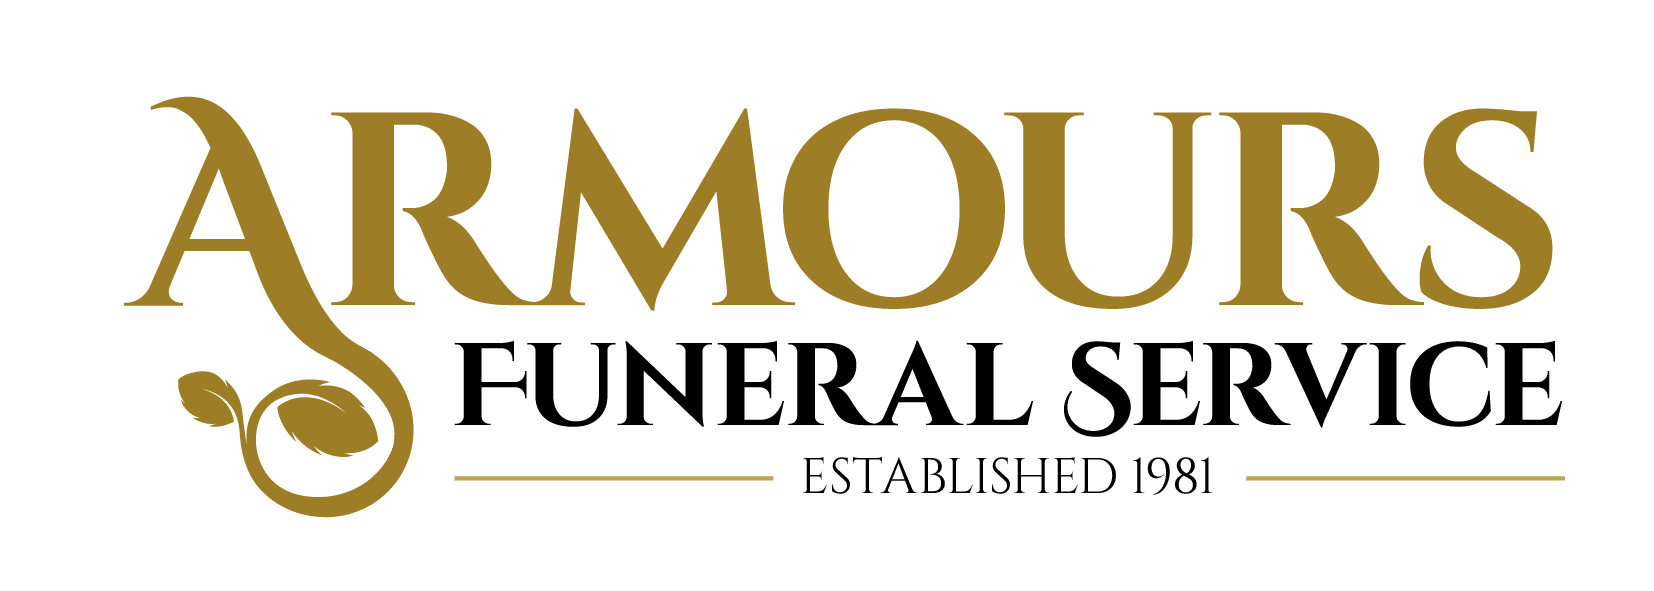 Armours Funeral Service logo